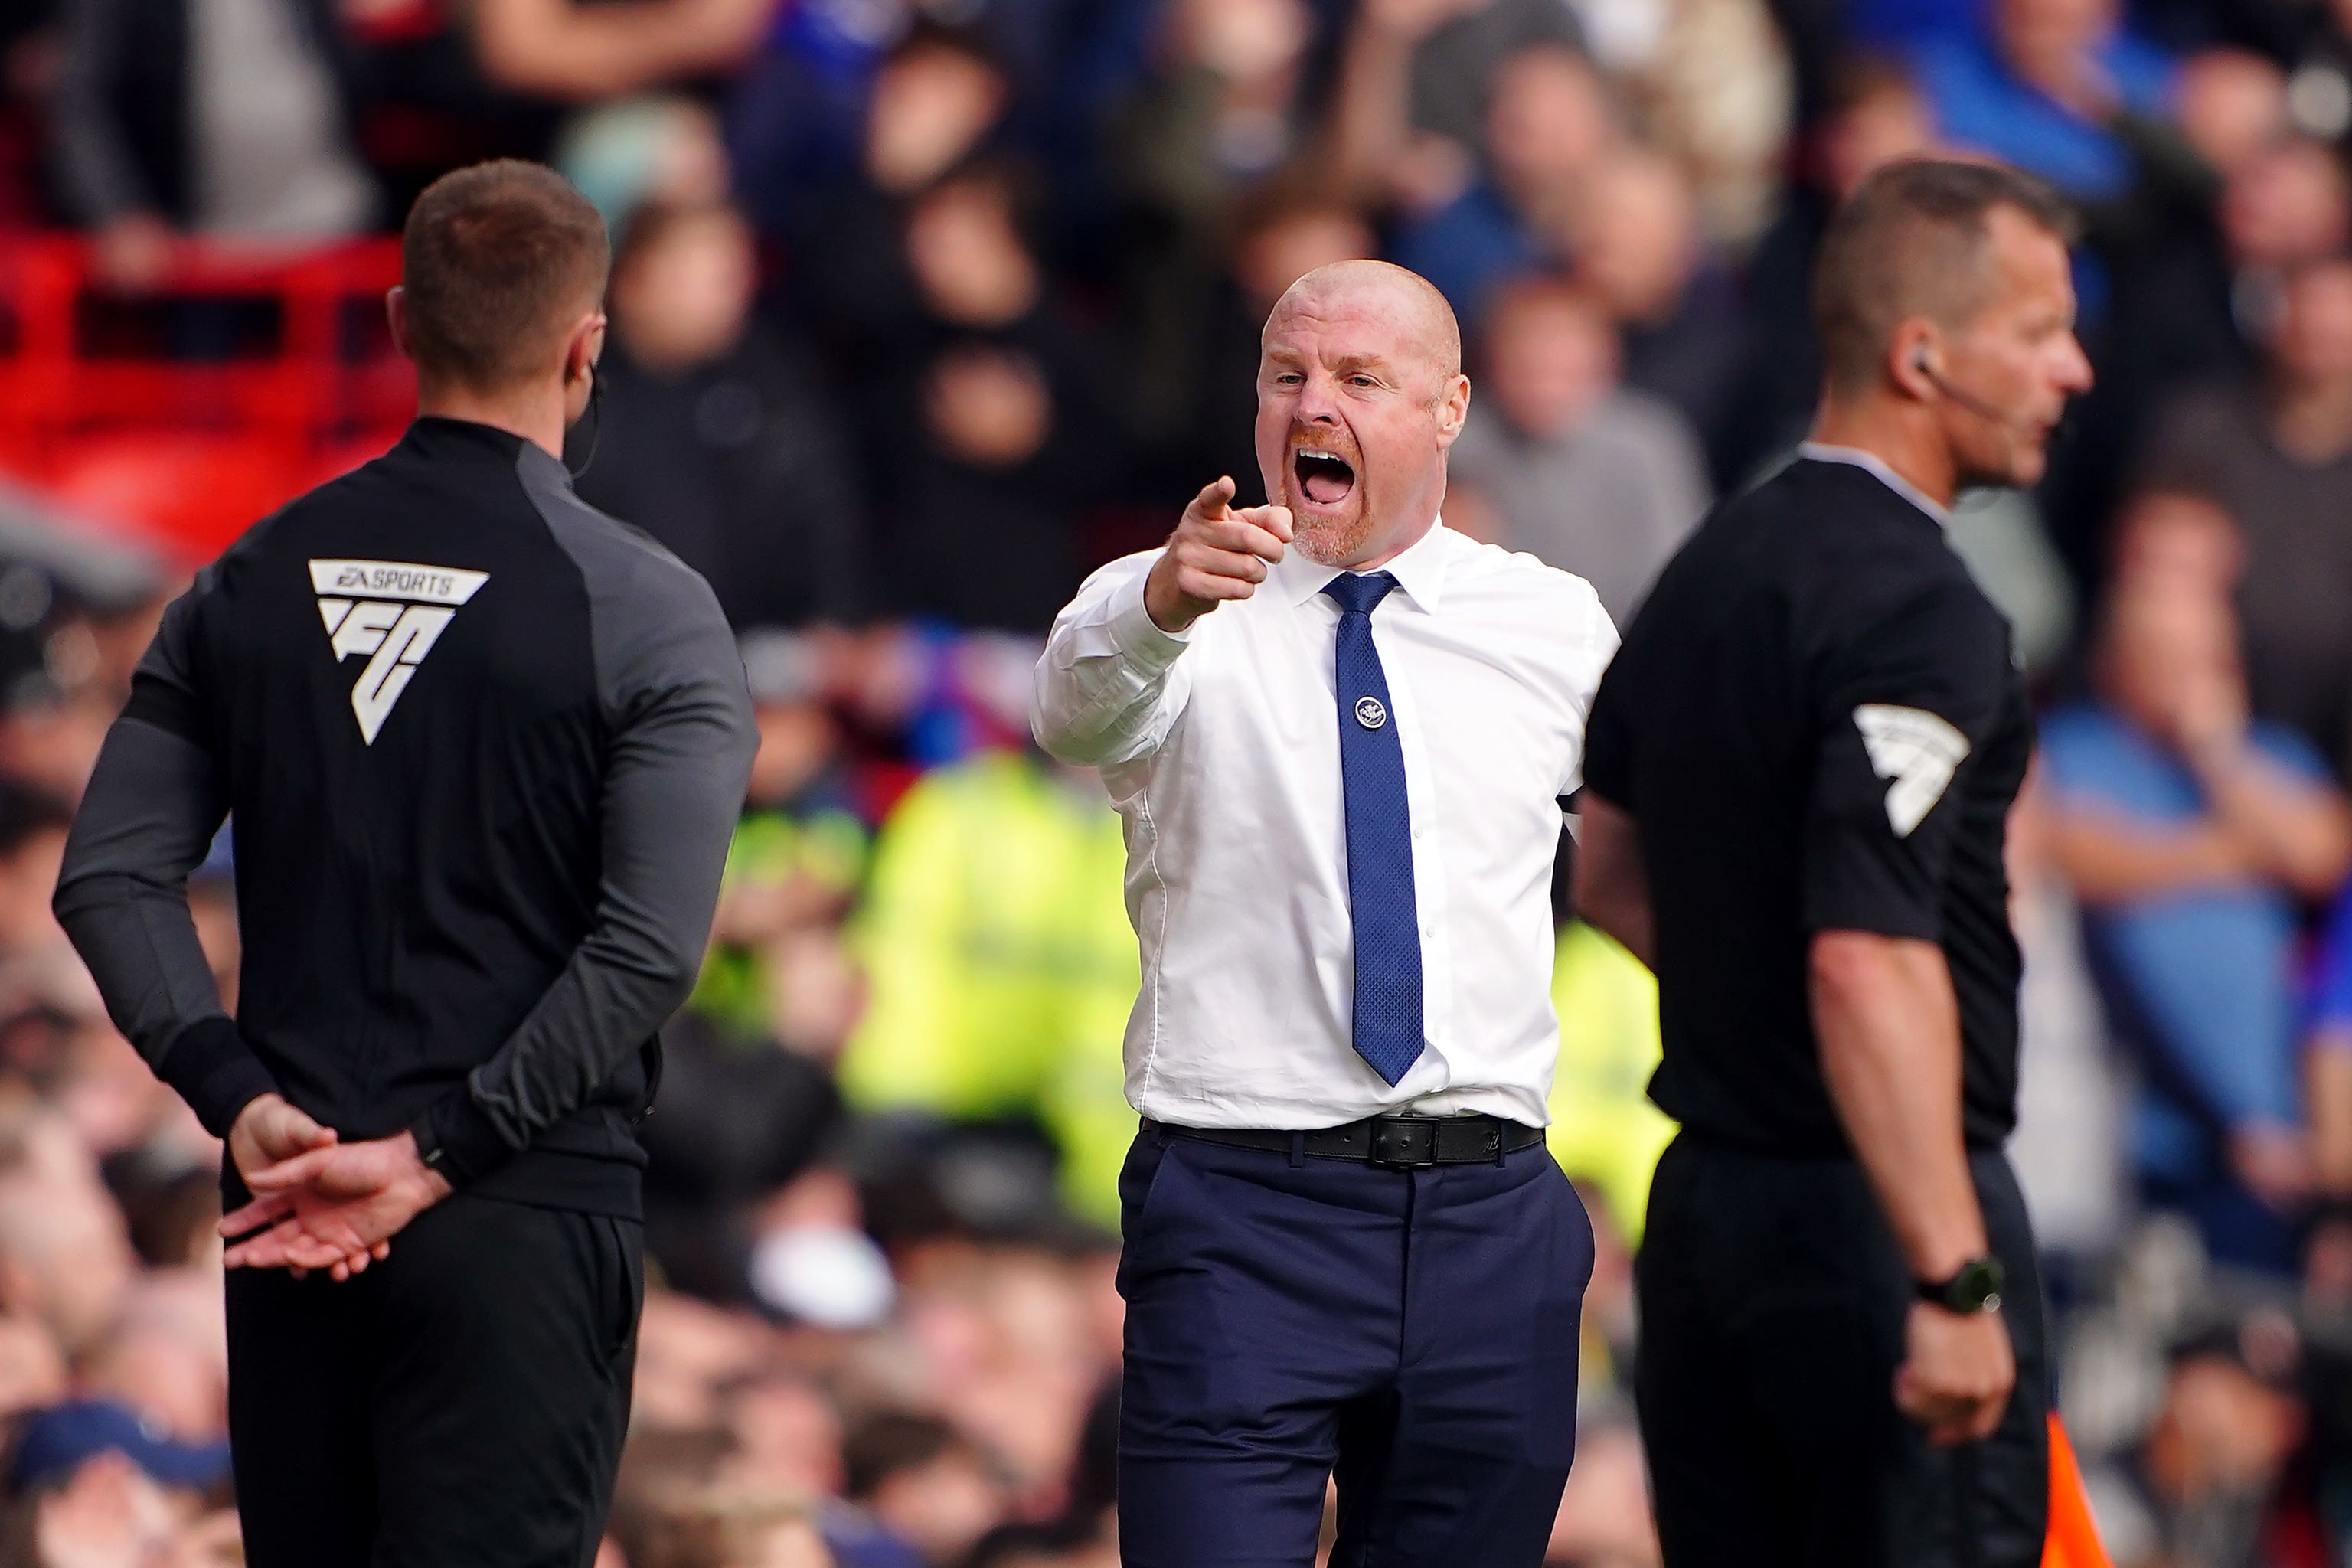 Sean Dyche hits out at referee over 'bizarre' decision in loss to Liverpool | The Independent